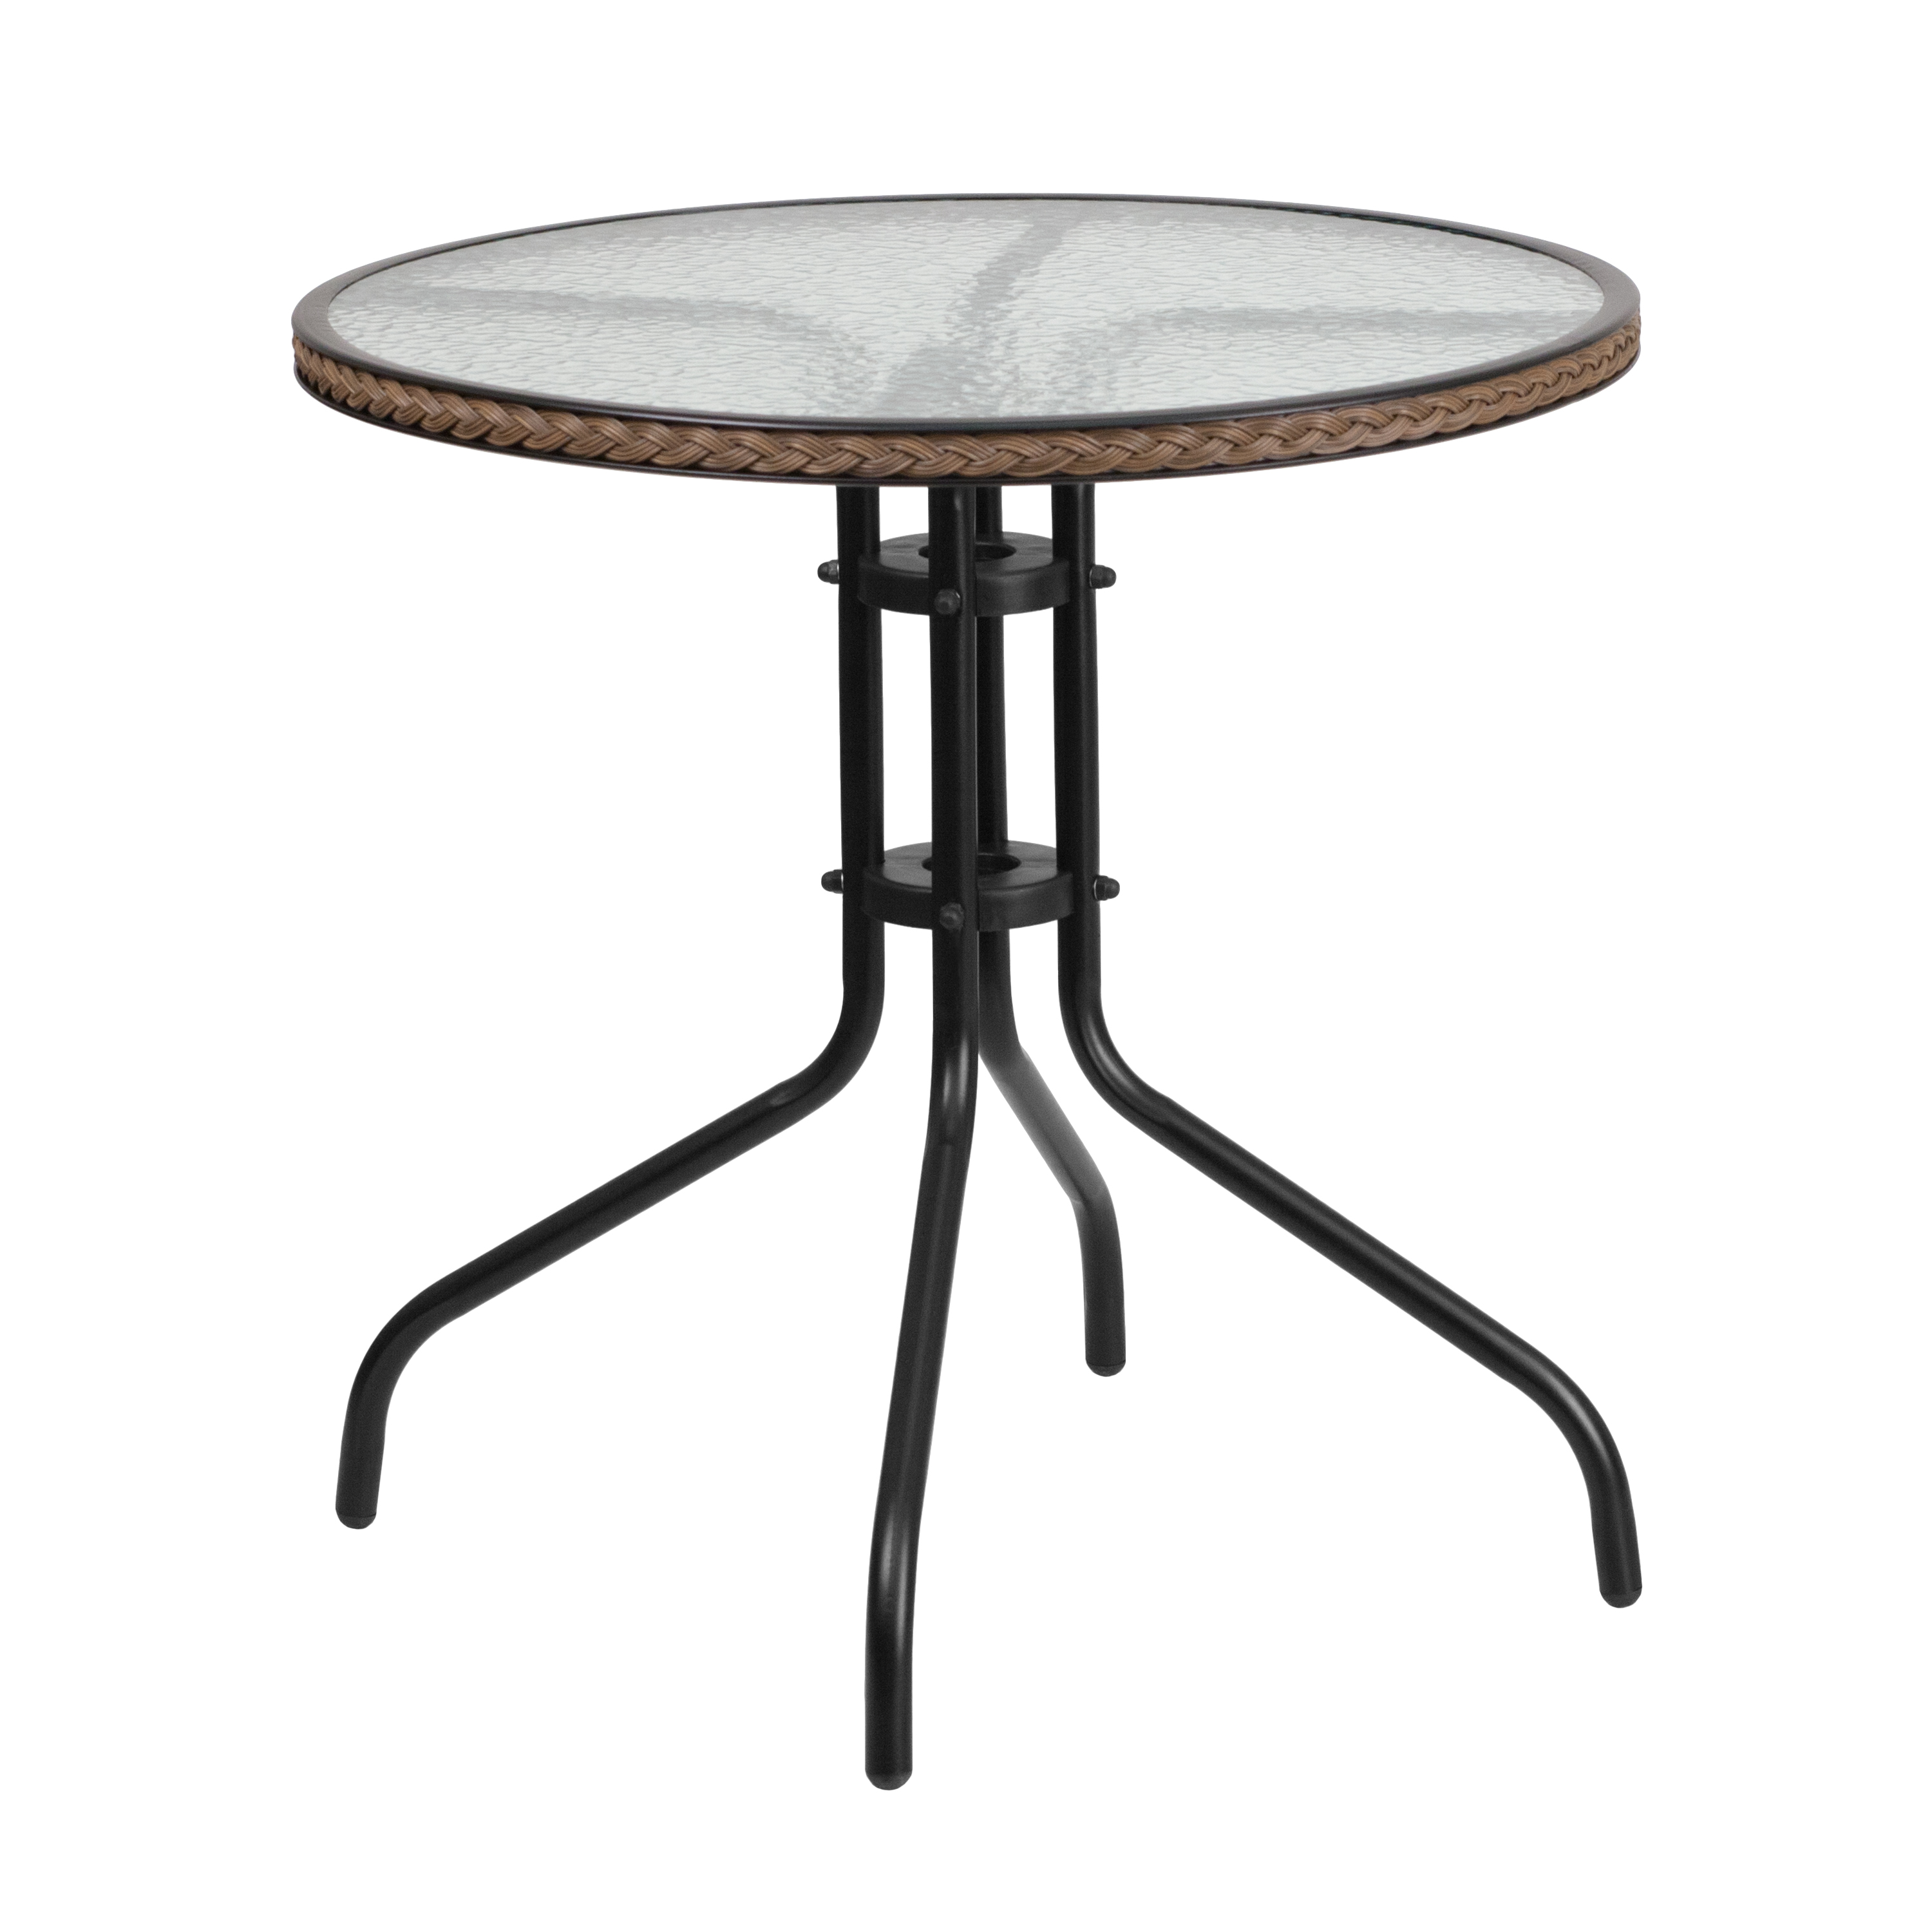 Flash Furniture TLH-087-DK-BN-GG 28'' Round Tempered Glass Top Patio Table with Dark Brown Rattan Edging